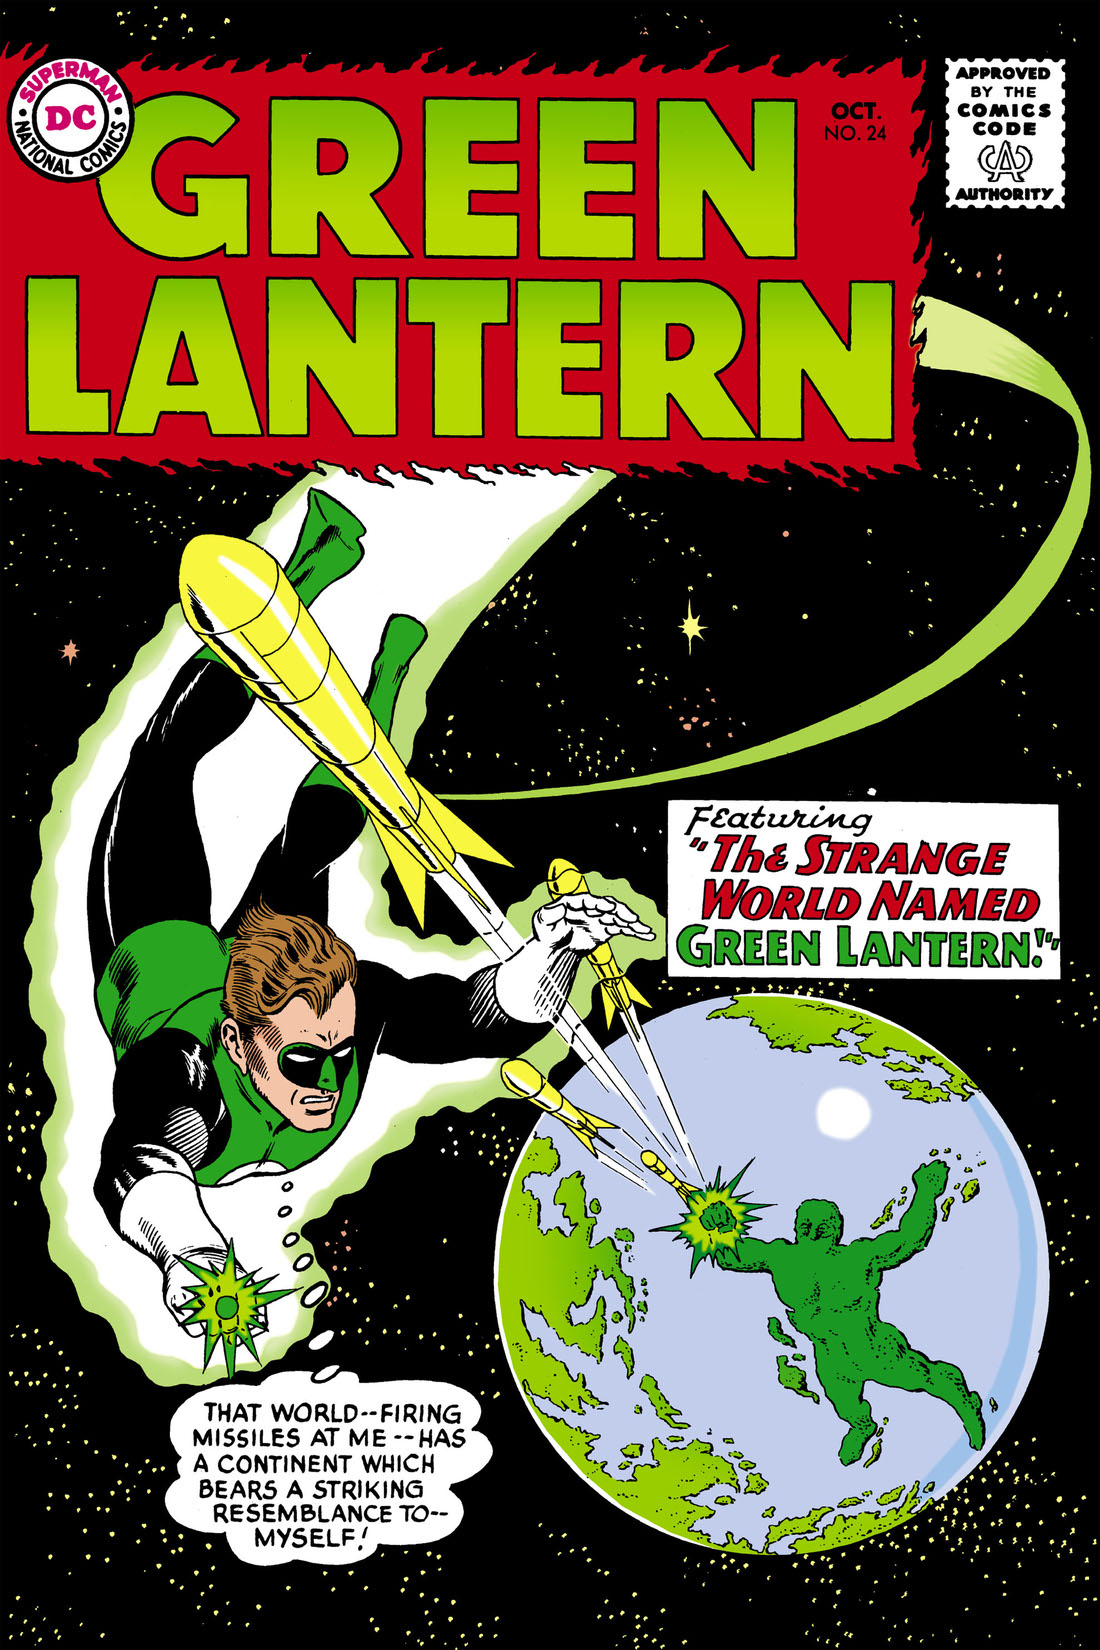 Green Lantern (1960-) #24 preview images